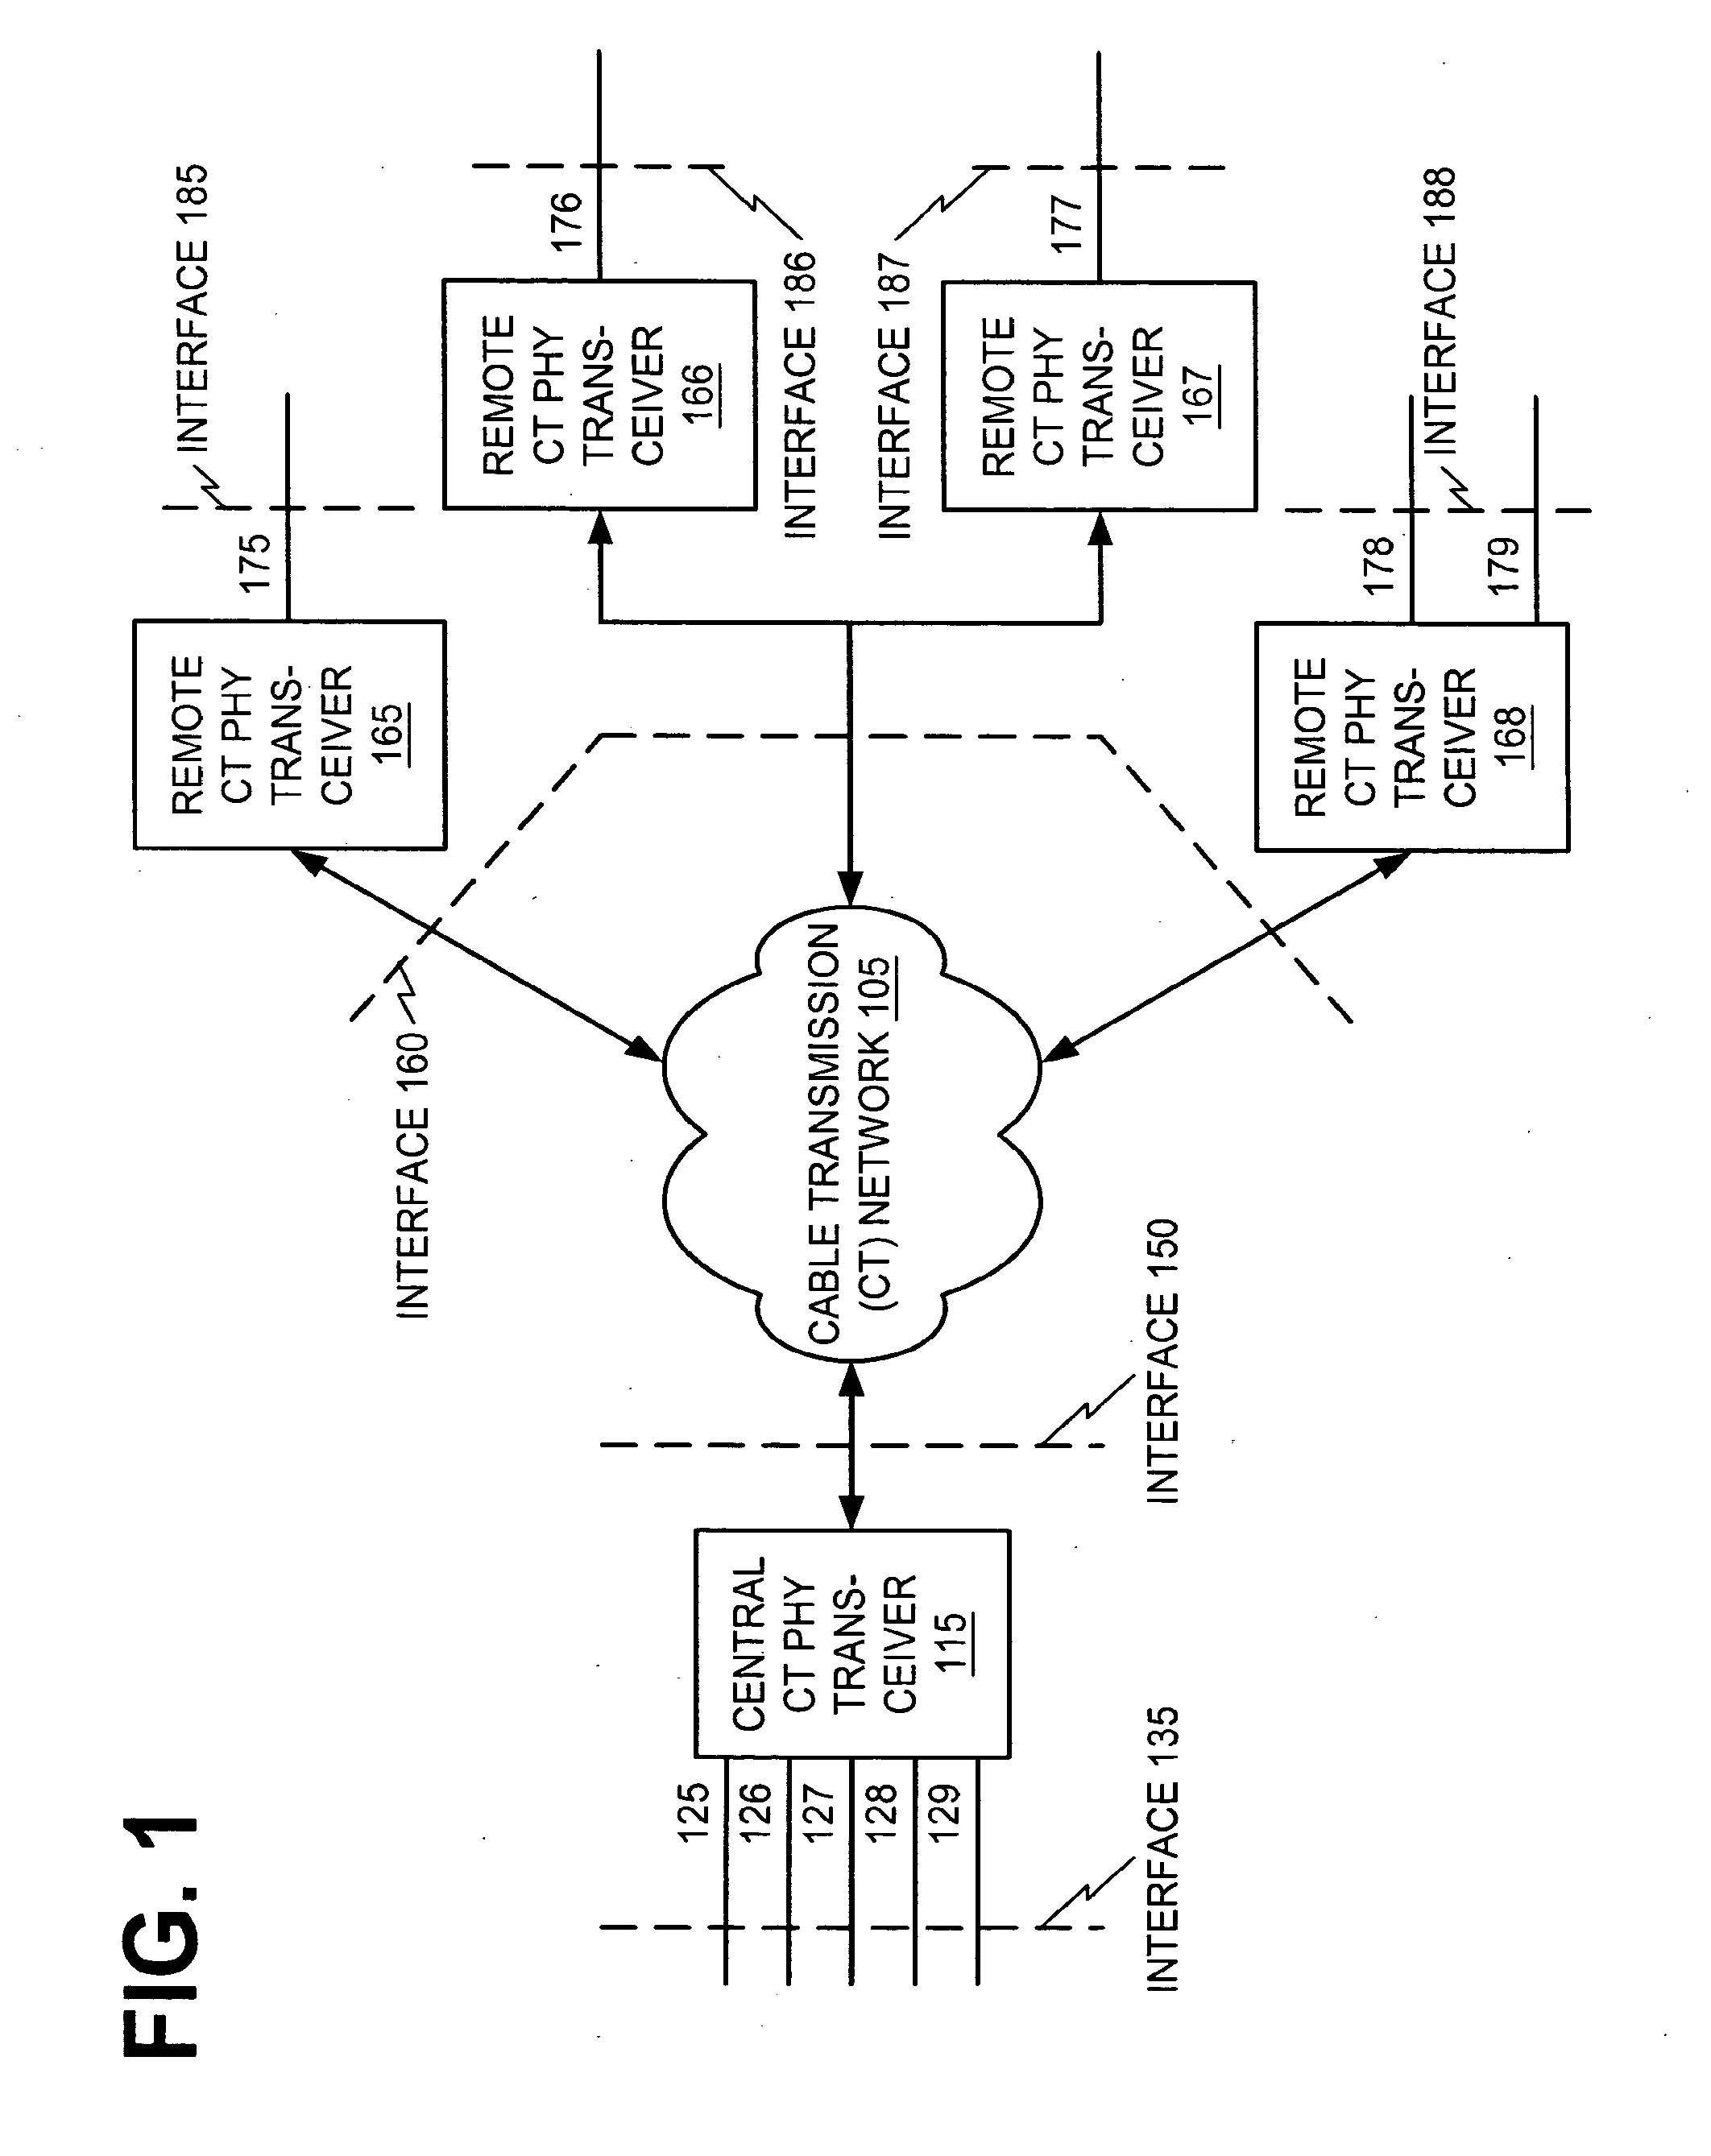 Communication of active data flows between a transport modem termination system and cable transport modems